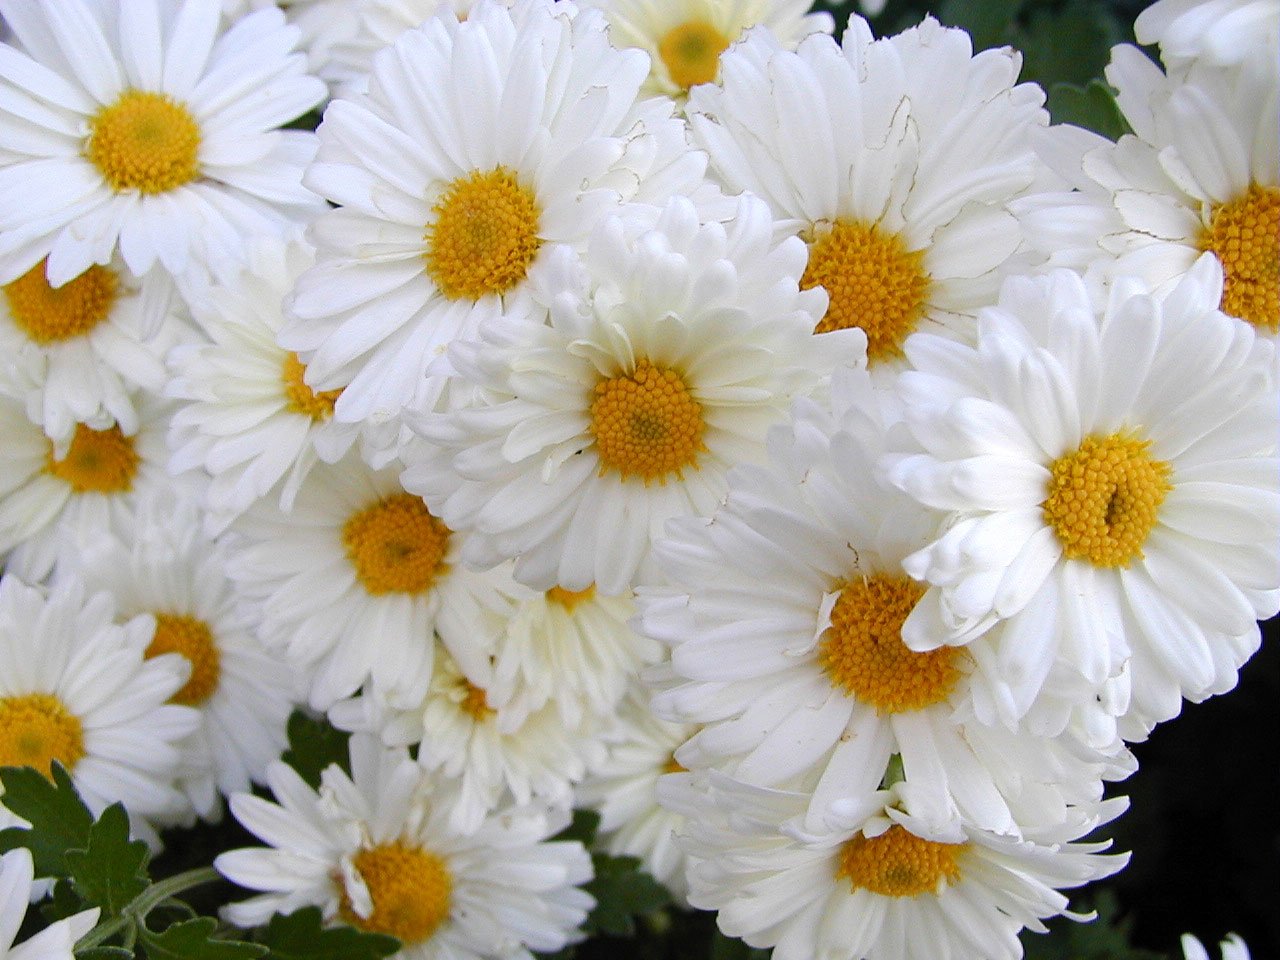 close up view of many white flowers with yellow centers